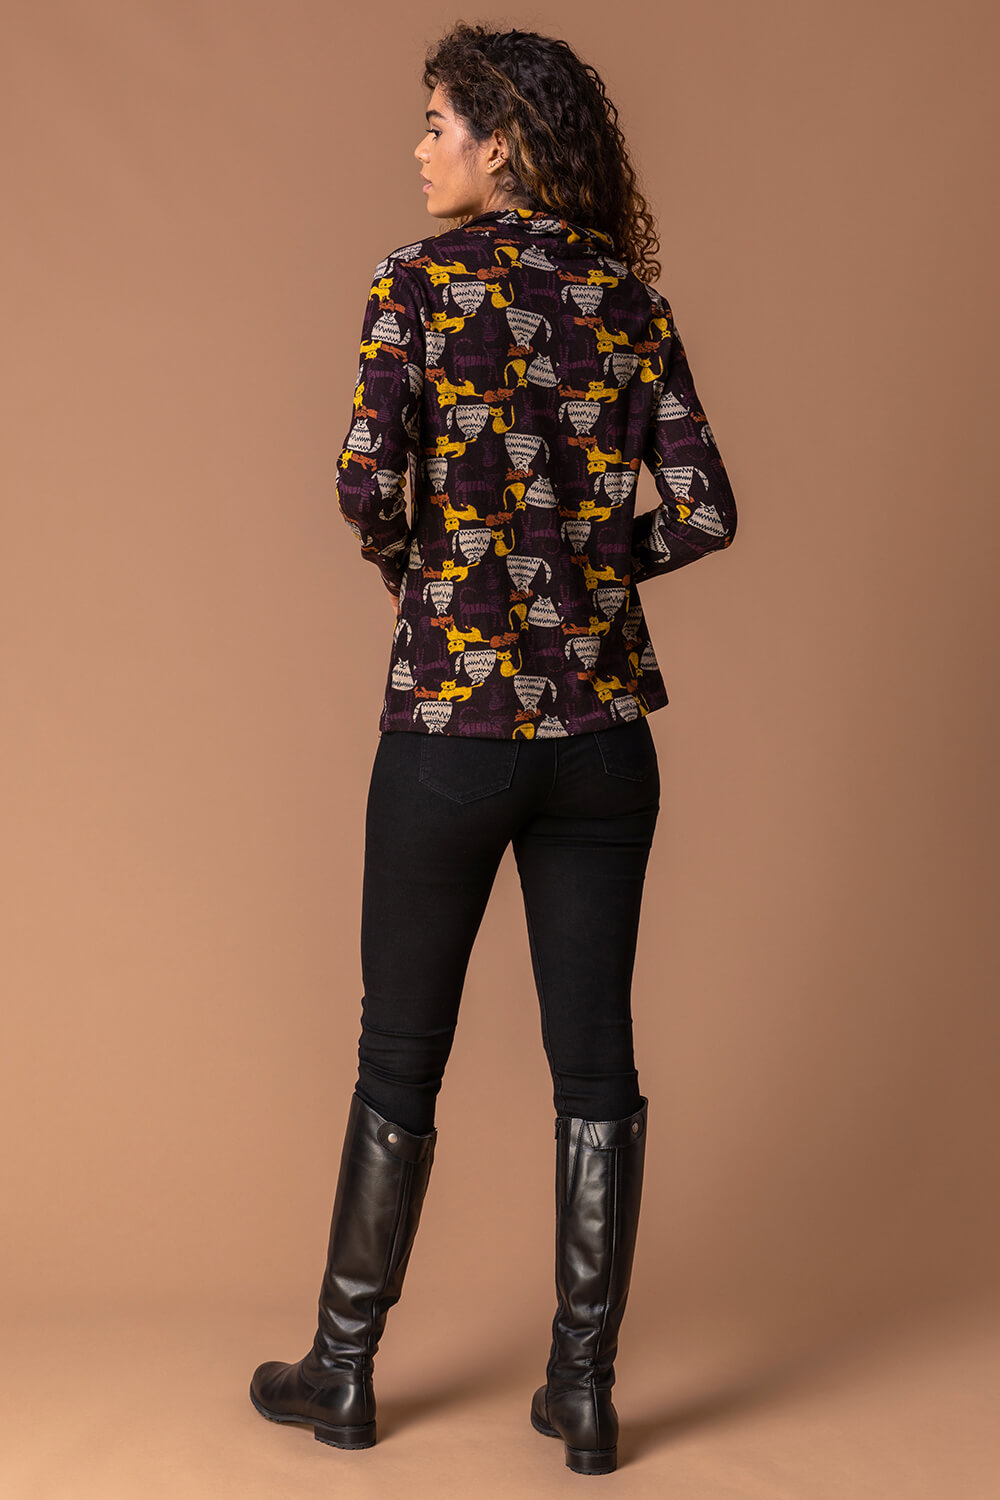 Chocolate Cat Print Cowl Neck Top, Image 2 of 4